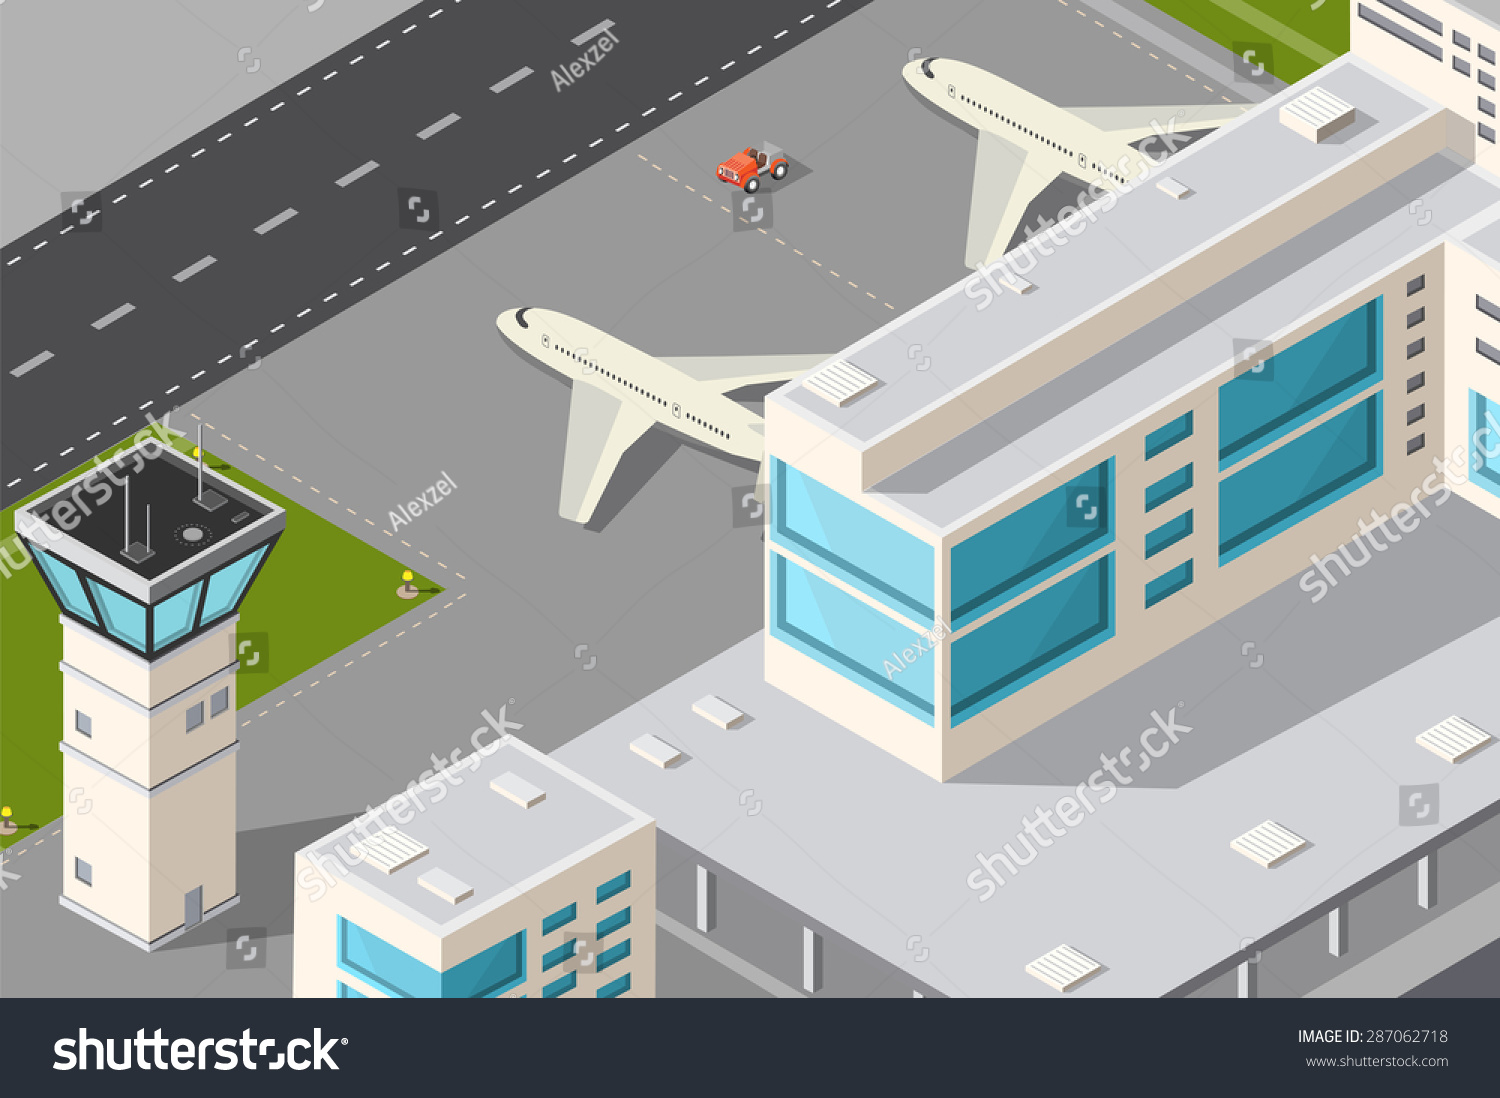 airport tower clipart - photo #42